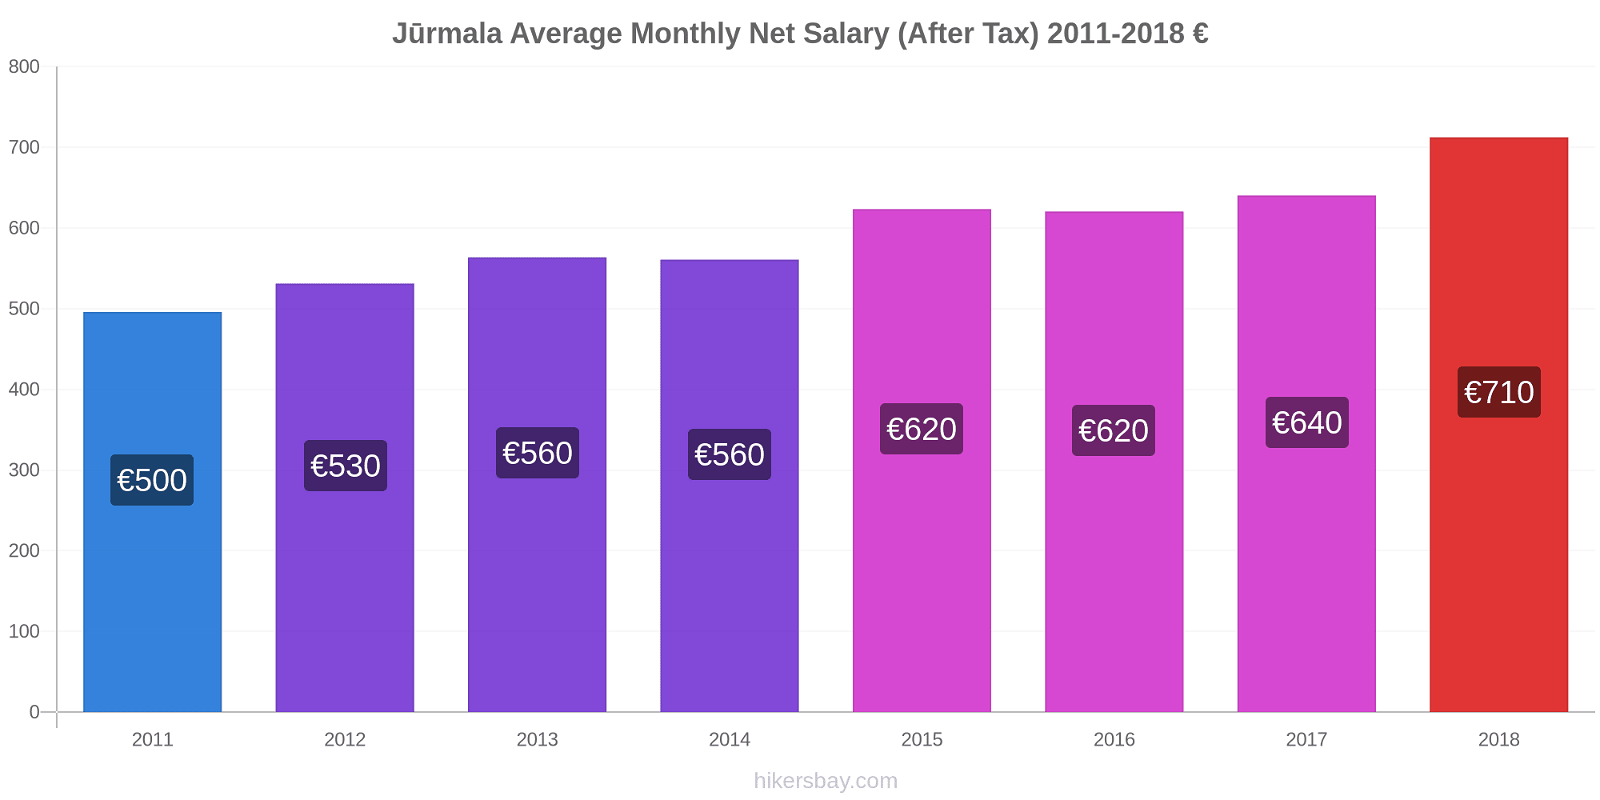 Jūrmala price changes Average Monthly Net Salary (After Tax) hikersbay.com